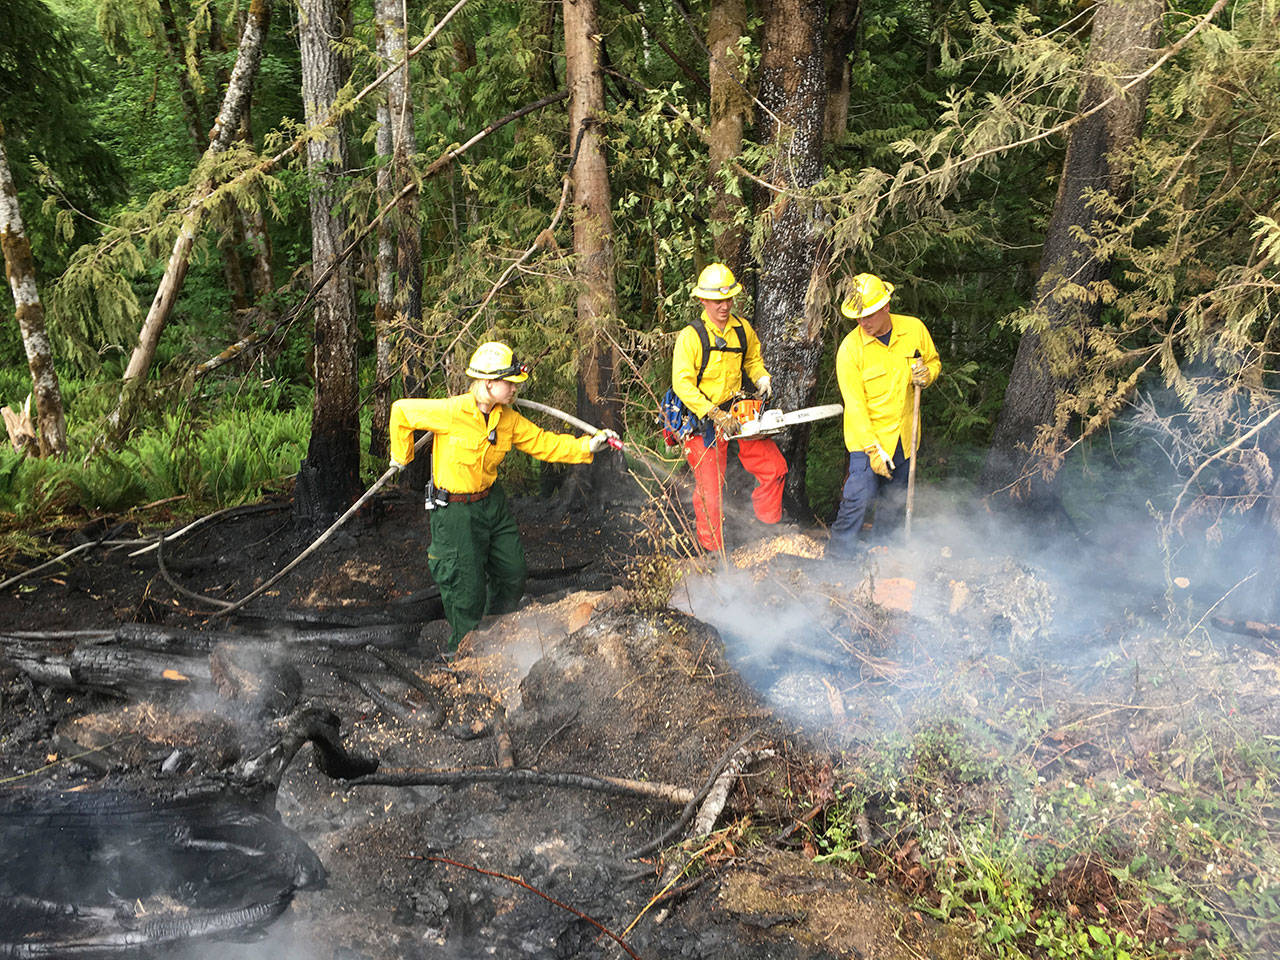 Firefighters Sarah Springob, from left, Tyler Gear and Zach Gear mop up a fire Sunday evening on state Department of Natural Resources land west of Port Angeles. (Clallam County Fire District No. 2)